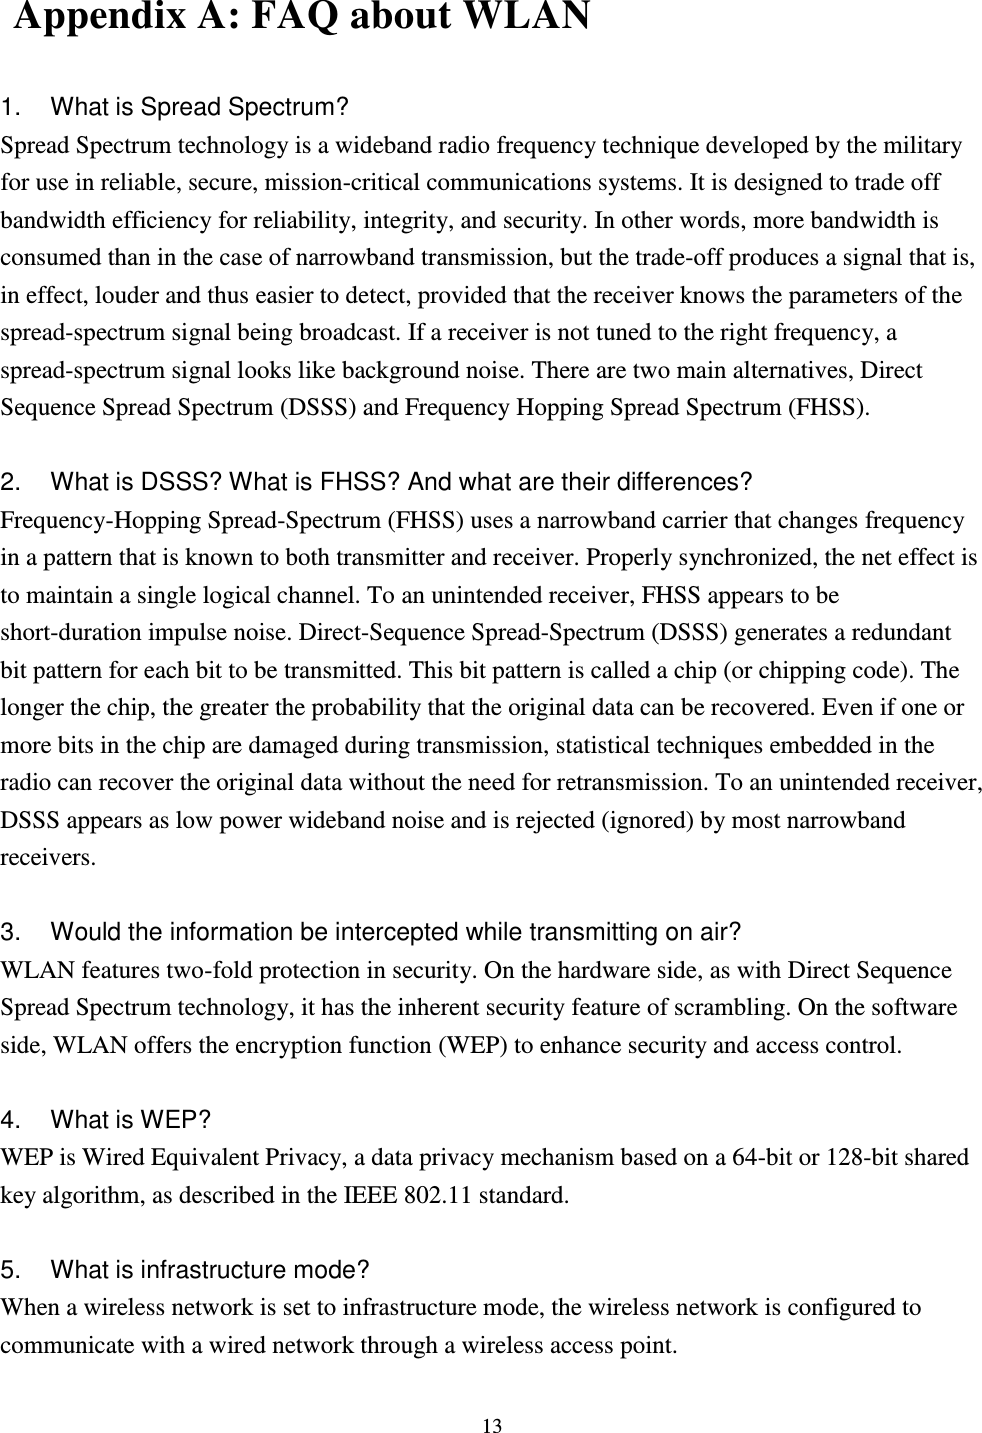  13   Appendix A: FAQ about WLAN  1.  What is Spread Spectrum? Spread Spectrum technology is a wideband radio frequency technique developed by the military for use in reliable, secure, mission-critical communications systems. It is designed to trade off bandwidth efficiency for reliability, integrity, and security. In other words, more bandwidth is consumed than in the case of narrowband transmission, but the trade-off produces a signal that is, in effect, louder and thus easier to detect, provided that the receiver knows the parameters of the spread-spectrum signal being broadcast. If a receiver is not tuned to the right frequency, a spread-spectrum signal looks like background noise. There are two main alternatives, Direct Sequence Spread Spectrum (DSSS) and Frequency Hopping Spread Spectrum (FHSS).  2.  What is DSSS? What is FHSS? And what are their differences? Frequency-Hopping Spread-Spectrum (FHSS) uses a narrowband carrier that changes frequency in a pattern that is known to both transmitter and receiver. Properly synchronized, the net effect is to maintain a single logical channel. To an unintended receiver, FHSS appears to be short-duration impulse noise. Direct-Sequence Spread-Spectrum (DSSS) generates a redundant bit pattern for each bit to be transmitted. This bit pattern is called a chip (or chipping code). The longer the chip, the greater the probability that the original data can be recovered. Even if one or more bits in the chip are damaged during transmission, statistical techniques embedded in the radio can recover the original data without the need for retransmission. To an unintended receiver, DSSS appears as low power wideband noise and is rejected (ignored) by most narrowband receivers.  3.  Would the information be intercepted while transmitting on air? WLAN features two-fold protection in security. On the hardware side, as with Direct Sequence Spread Spectrum technology, it has the inherent security feature of scrambling. On the software side, WLAN offers the encryption function (WEP) to enhance security and access control.  4.  What is WEP? WEP is Wired Equivalent Privacy, a data privacy mechanism based on a 64-bit or 128-bit shared key algorithm, as described in the IEEE 802.11 standard.    5.  What is infrastructure mode? When a wireless network is set to infrastructure mode, the wireless network is configured to communicate with a wired network through a wireless access point. 